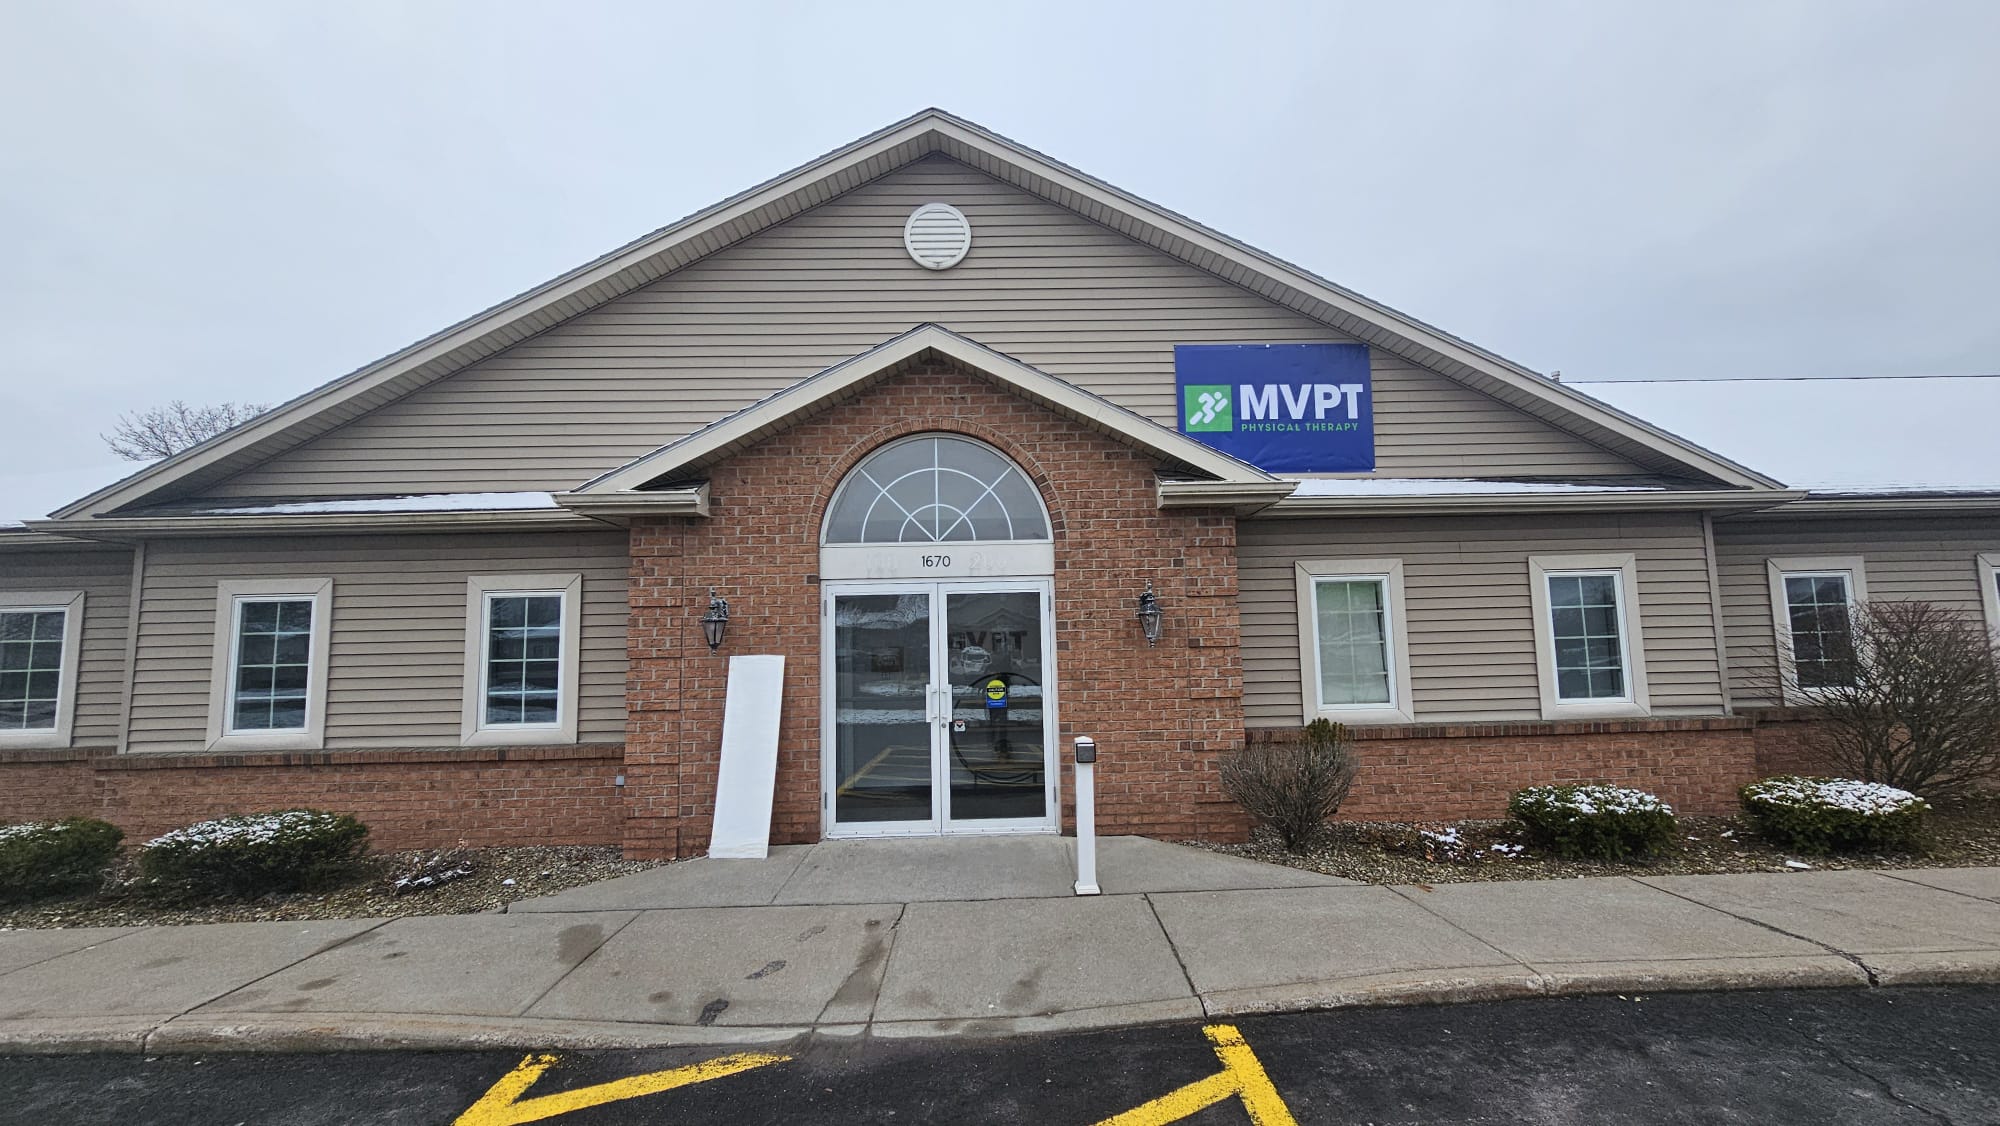 Image 4 | MVPT Physical Therapy - Empire Blvd